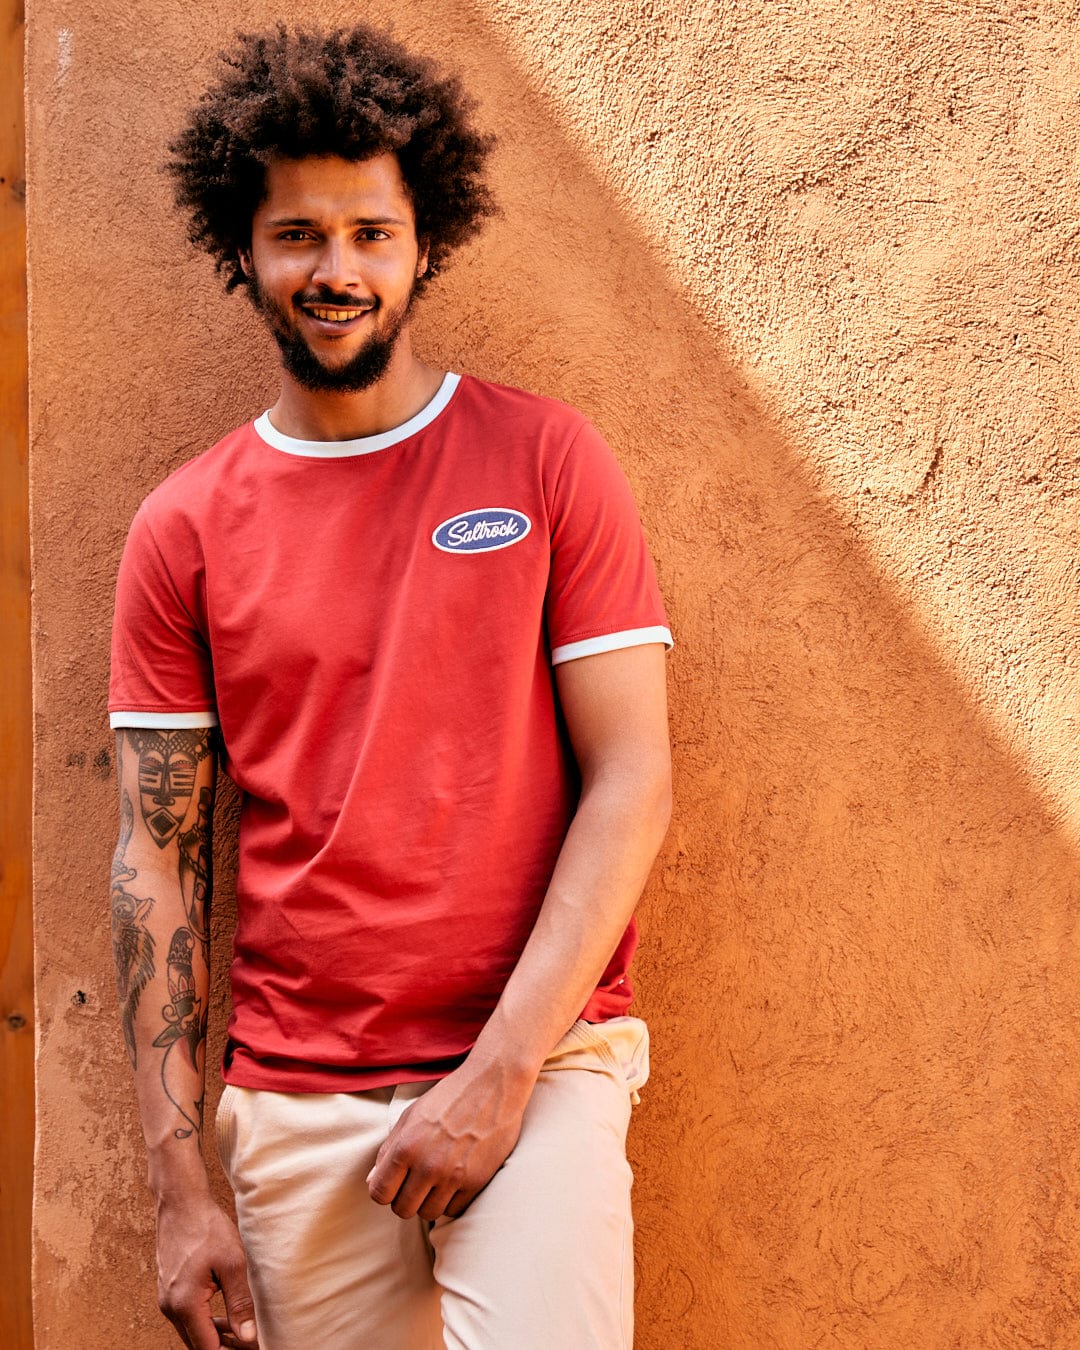 A young man with curly hair and a tattoo on his arm smiles while leaning against an orange wall, dressed in a red Striker Ringer - Mens Short Sleeve T-Shirt with Saltrock branding embroidered and beige pants.